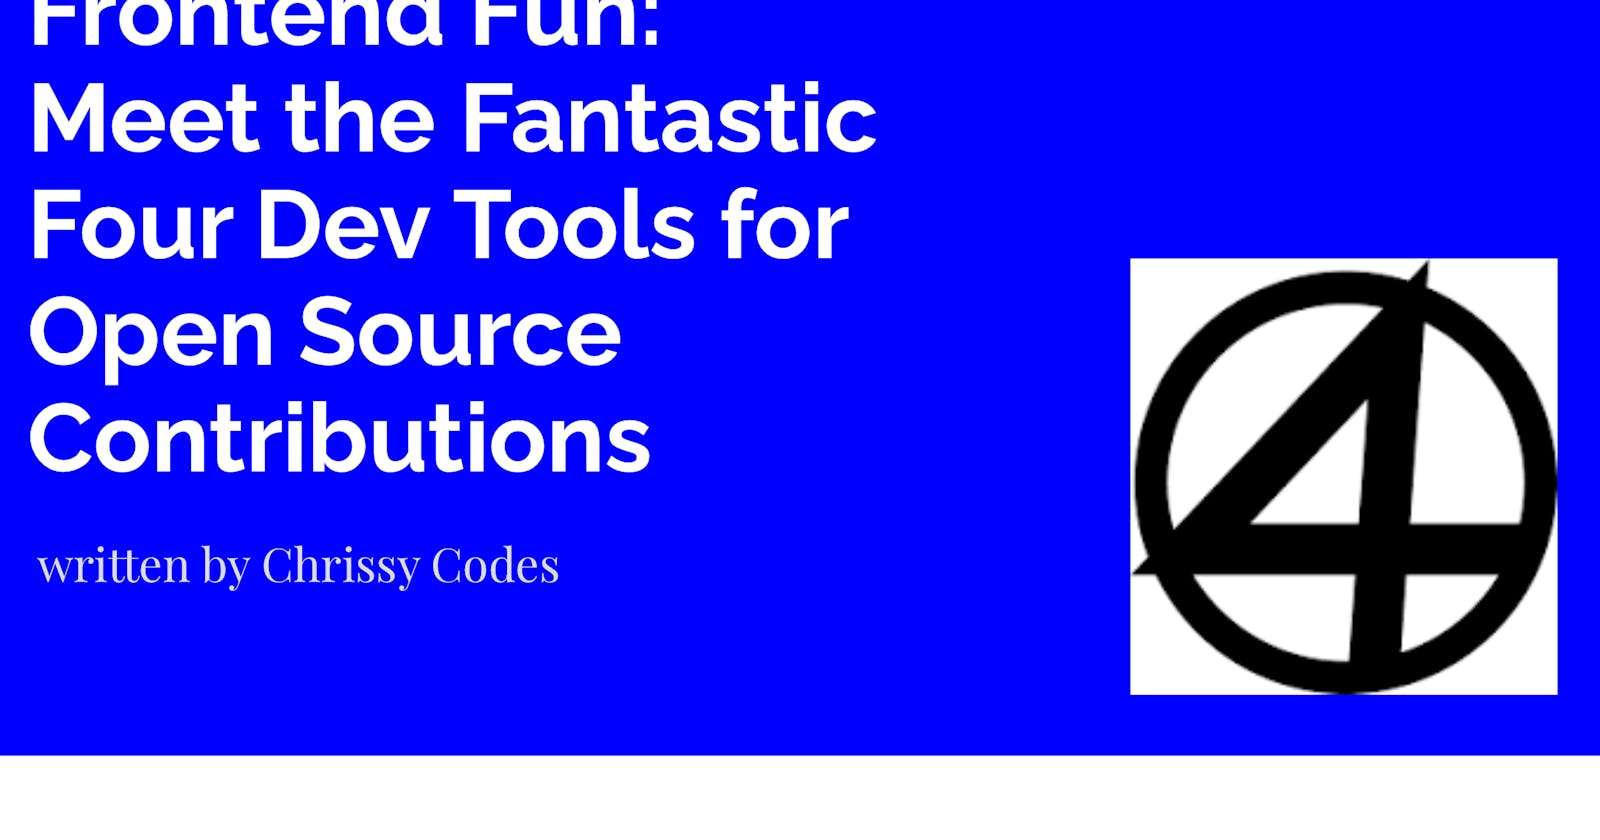 Frontend Fun: Meet the Fantastic Four Dev Tools for Open Source Contributions